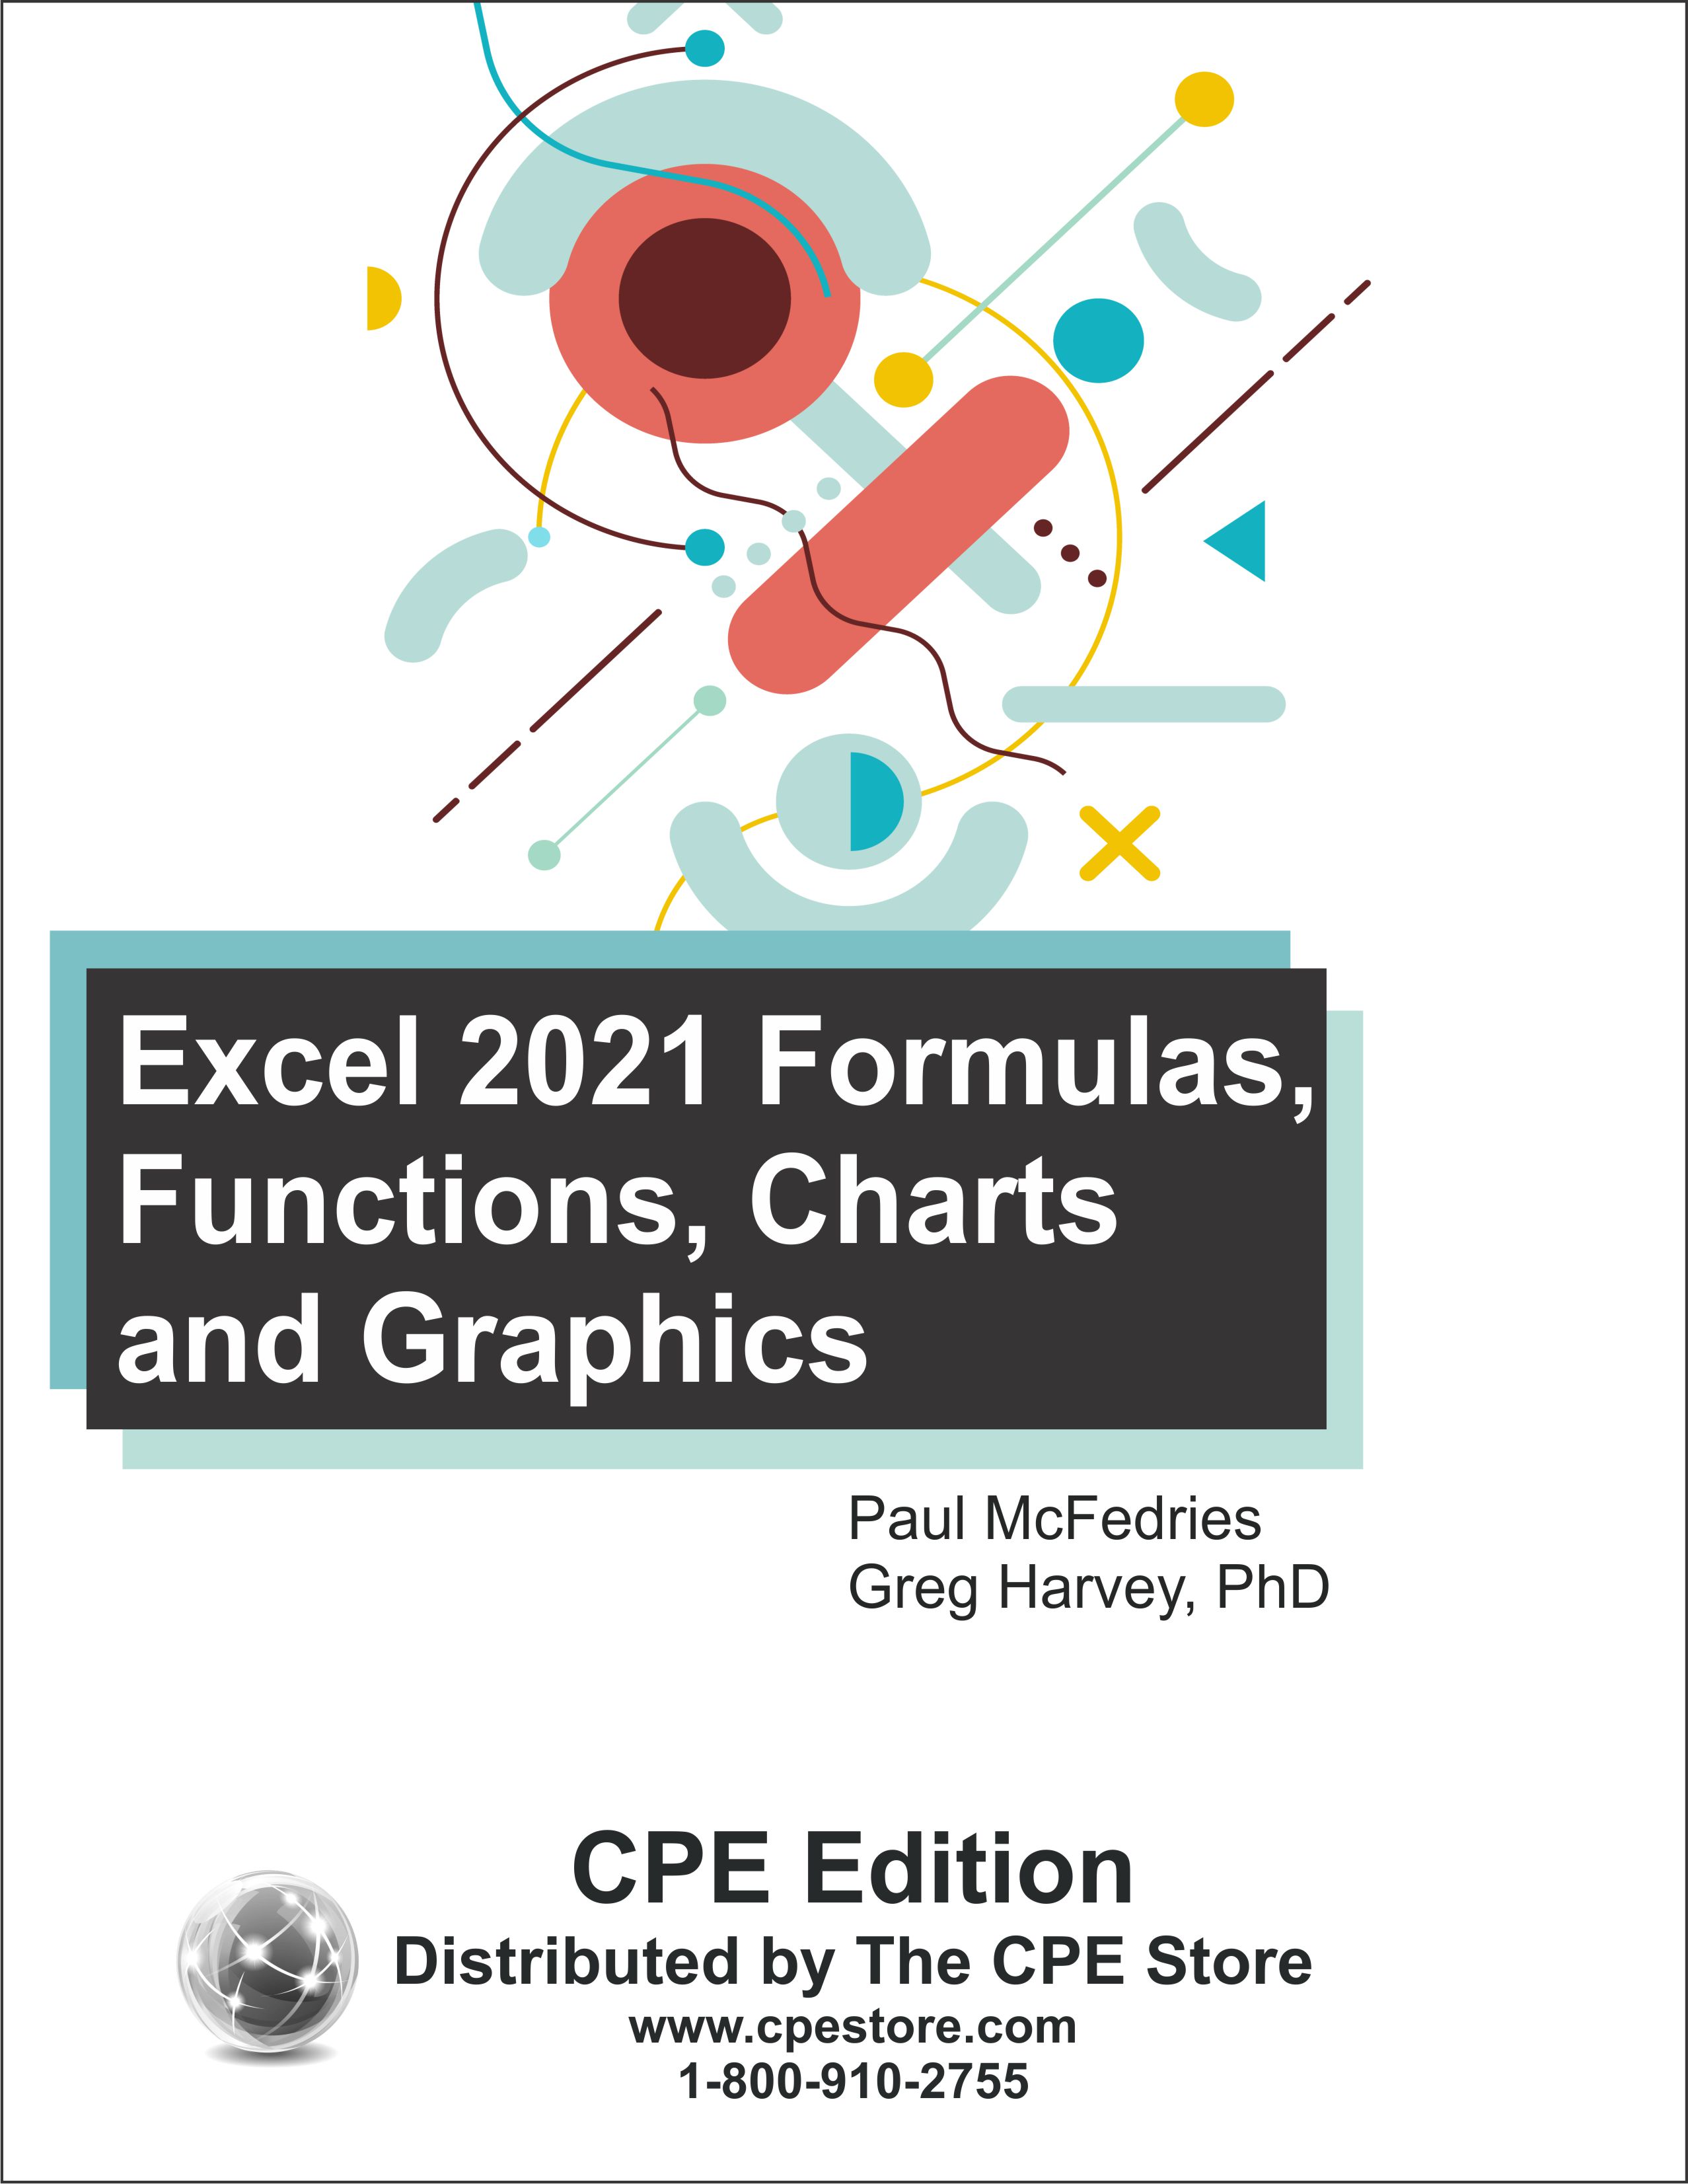 Excel 2021 Formulas, Functions, Charts and Graphics